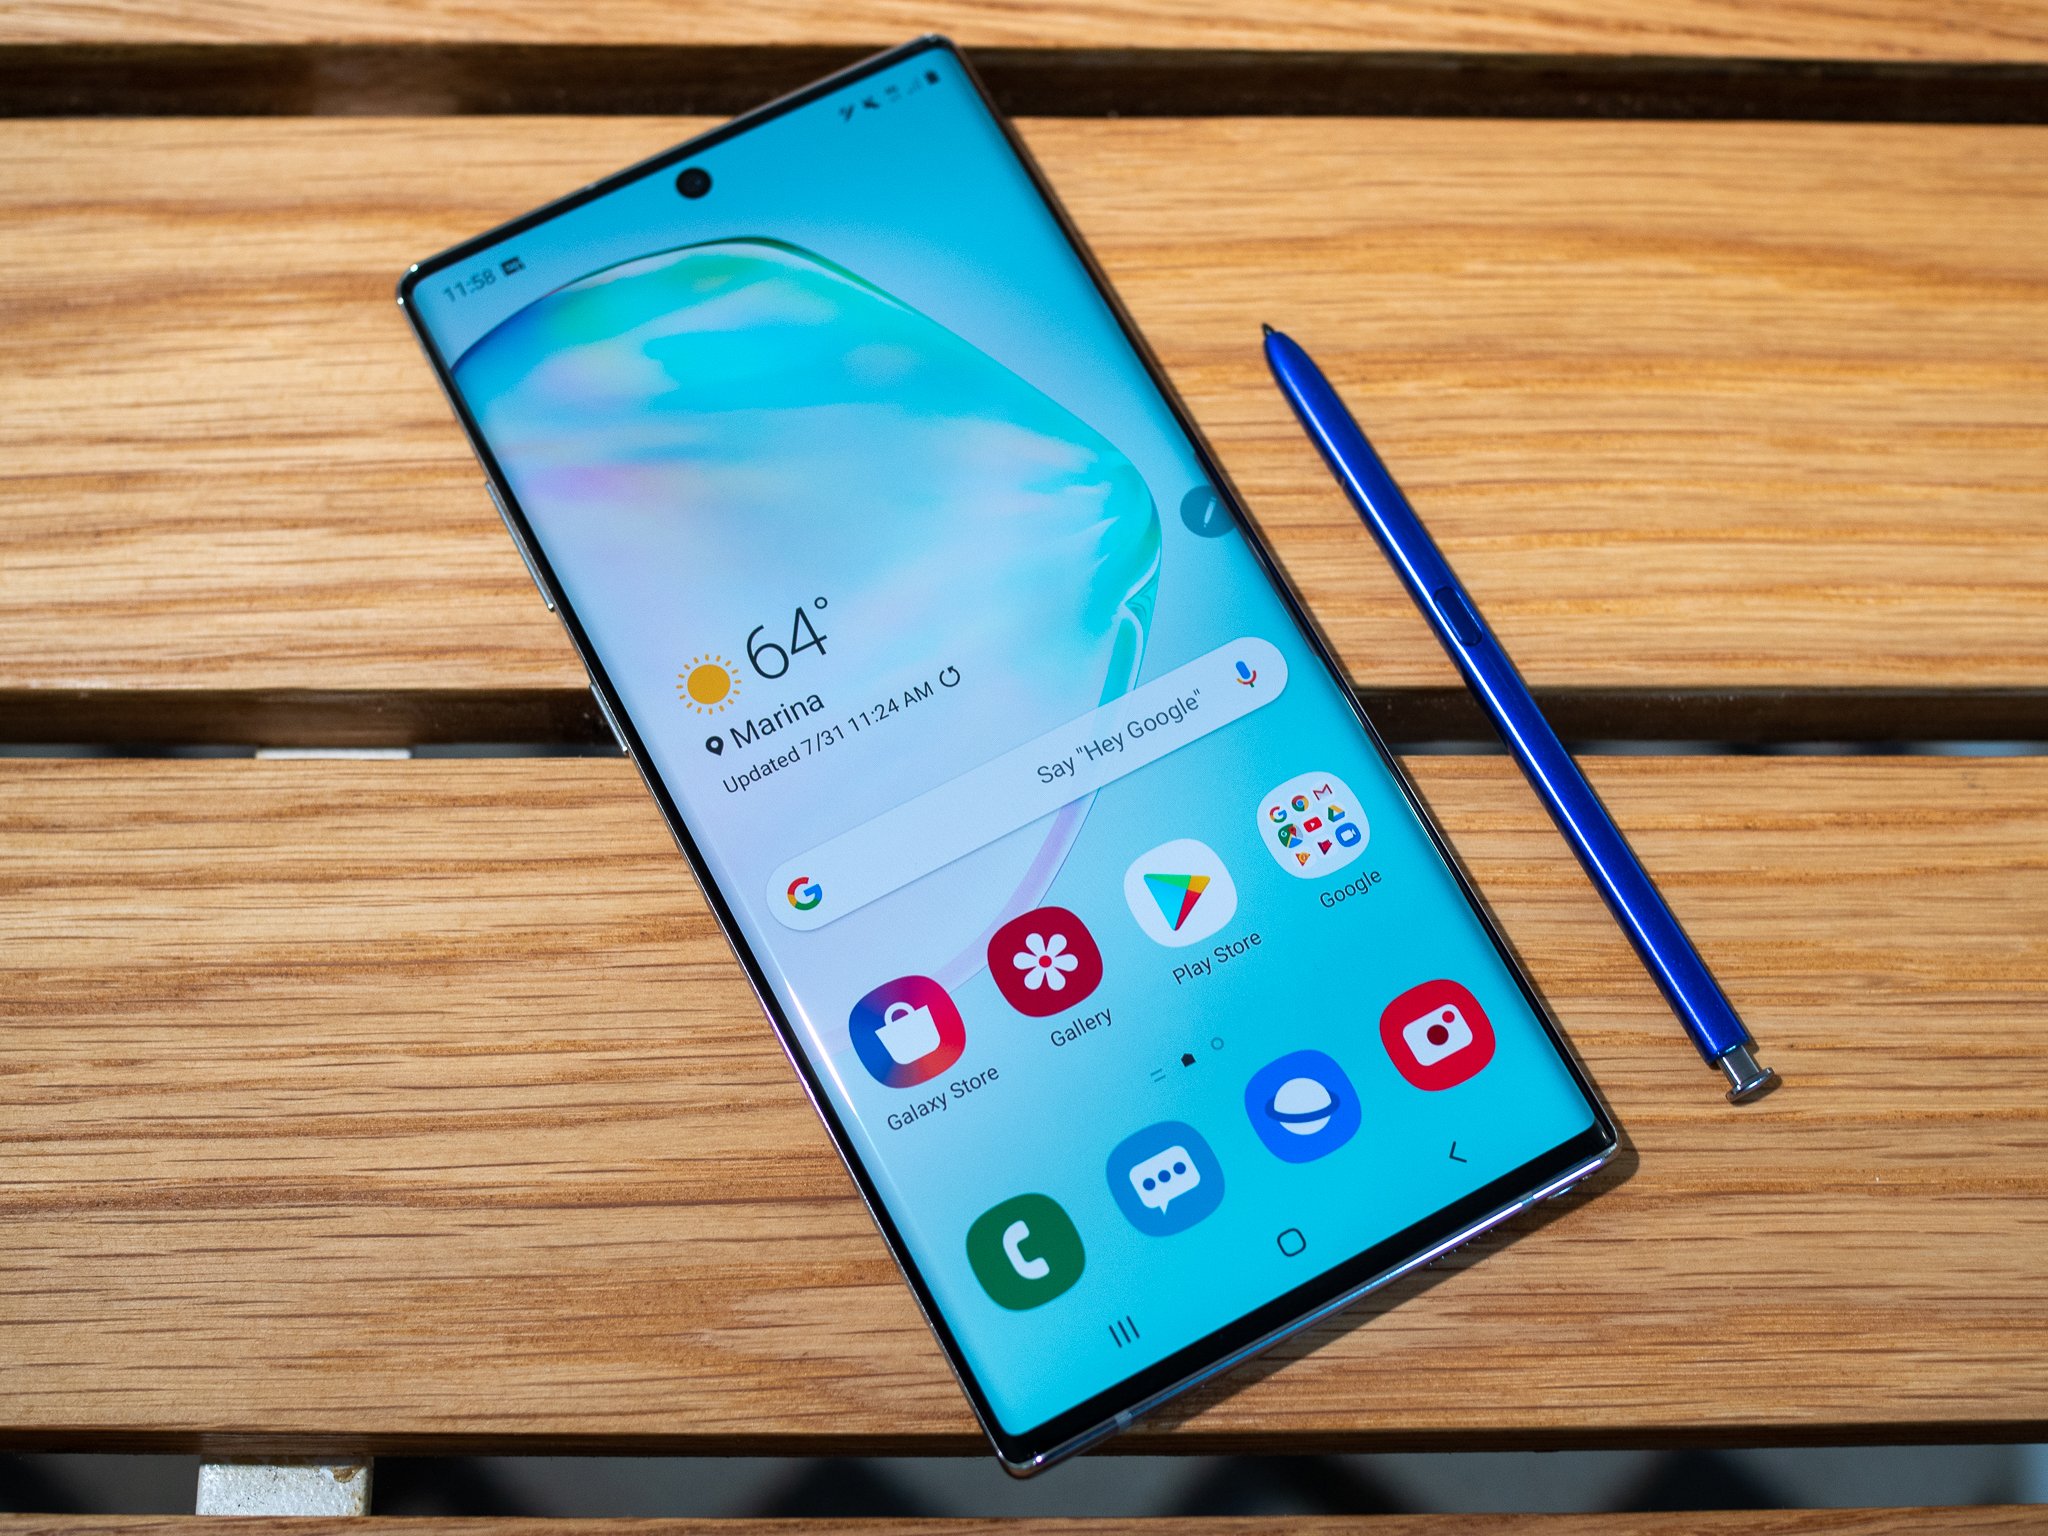 Worst Note 10 Plus features